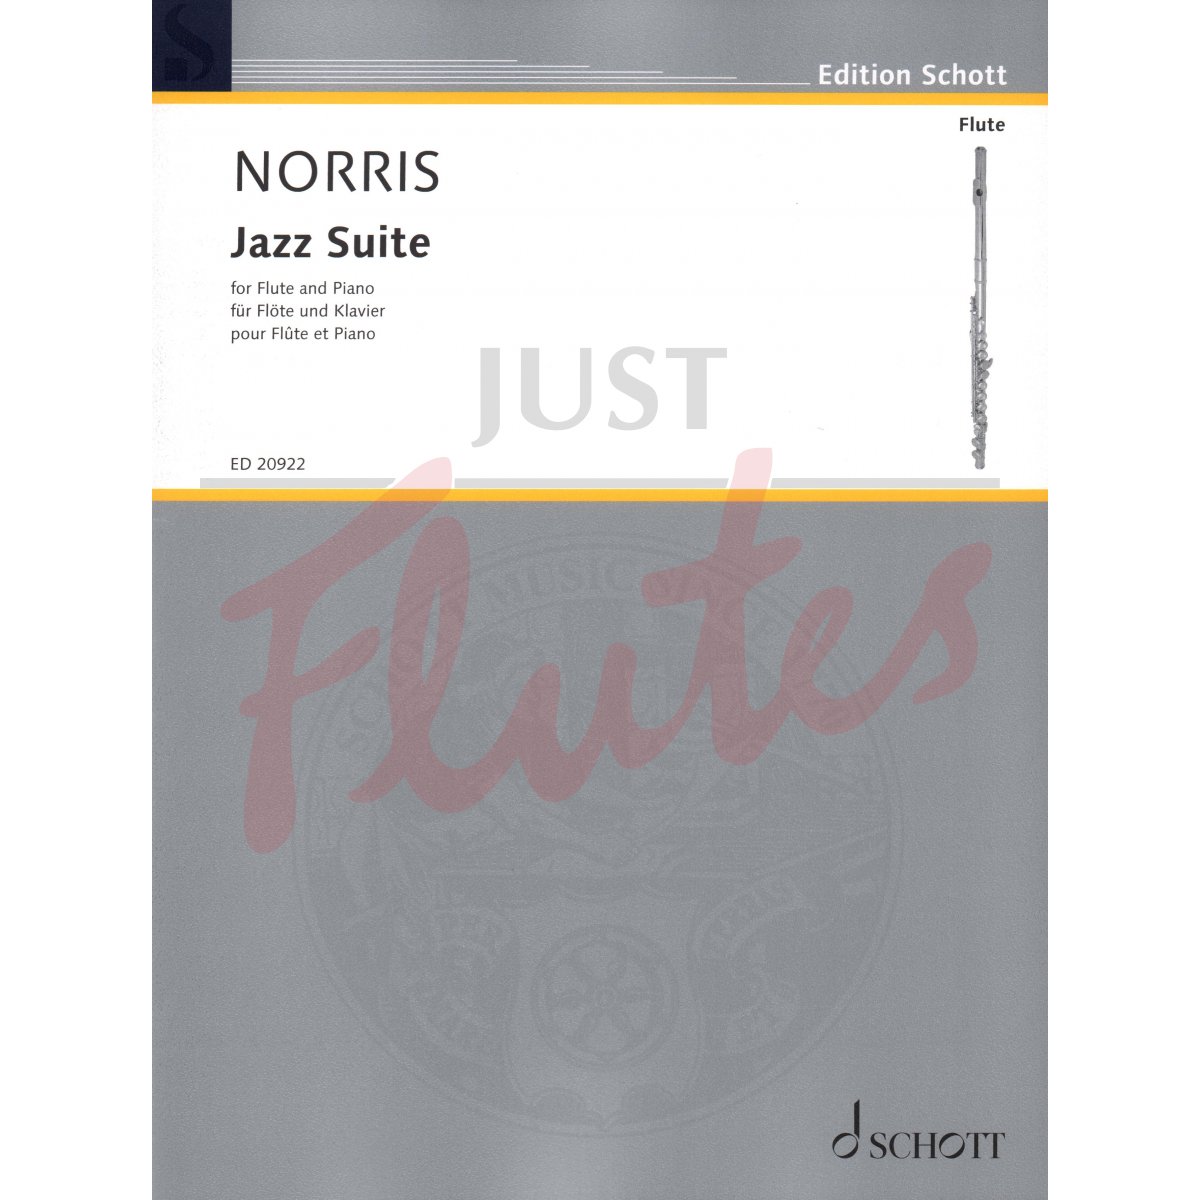 Jazz Suite for Flute and Piano